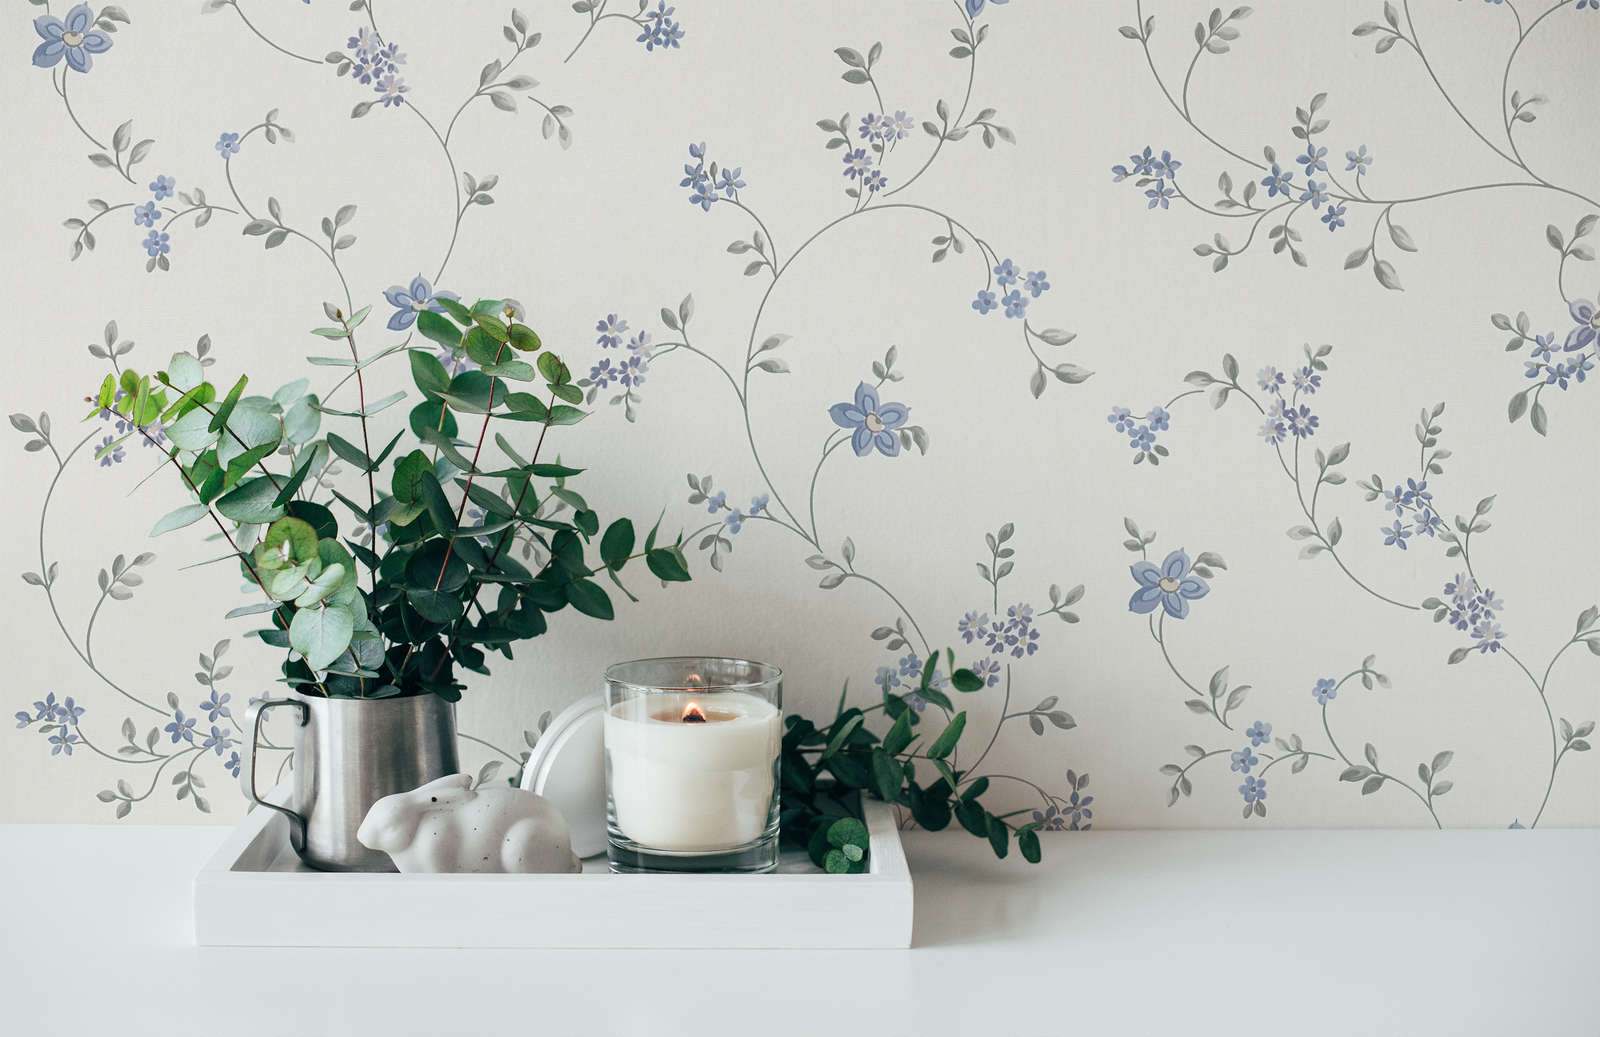             Non-woven wallpaper with floral vines in country style - cream, grey, blue
        